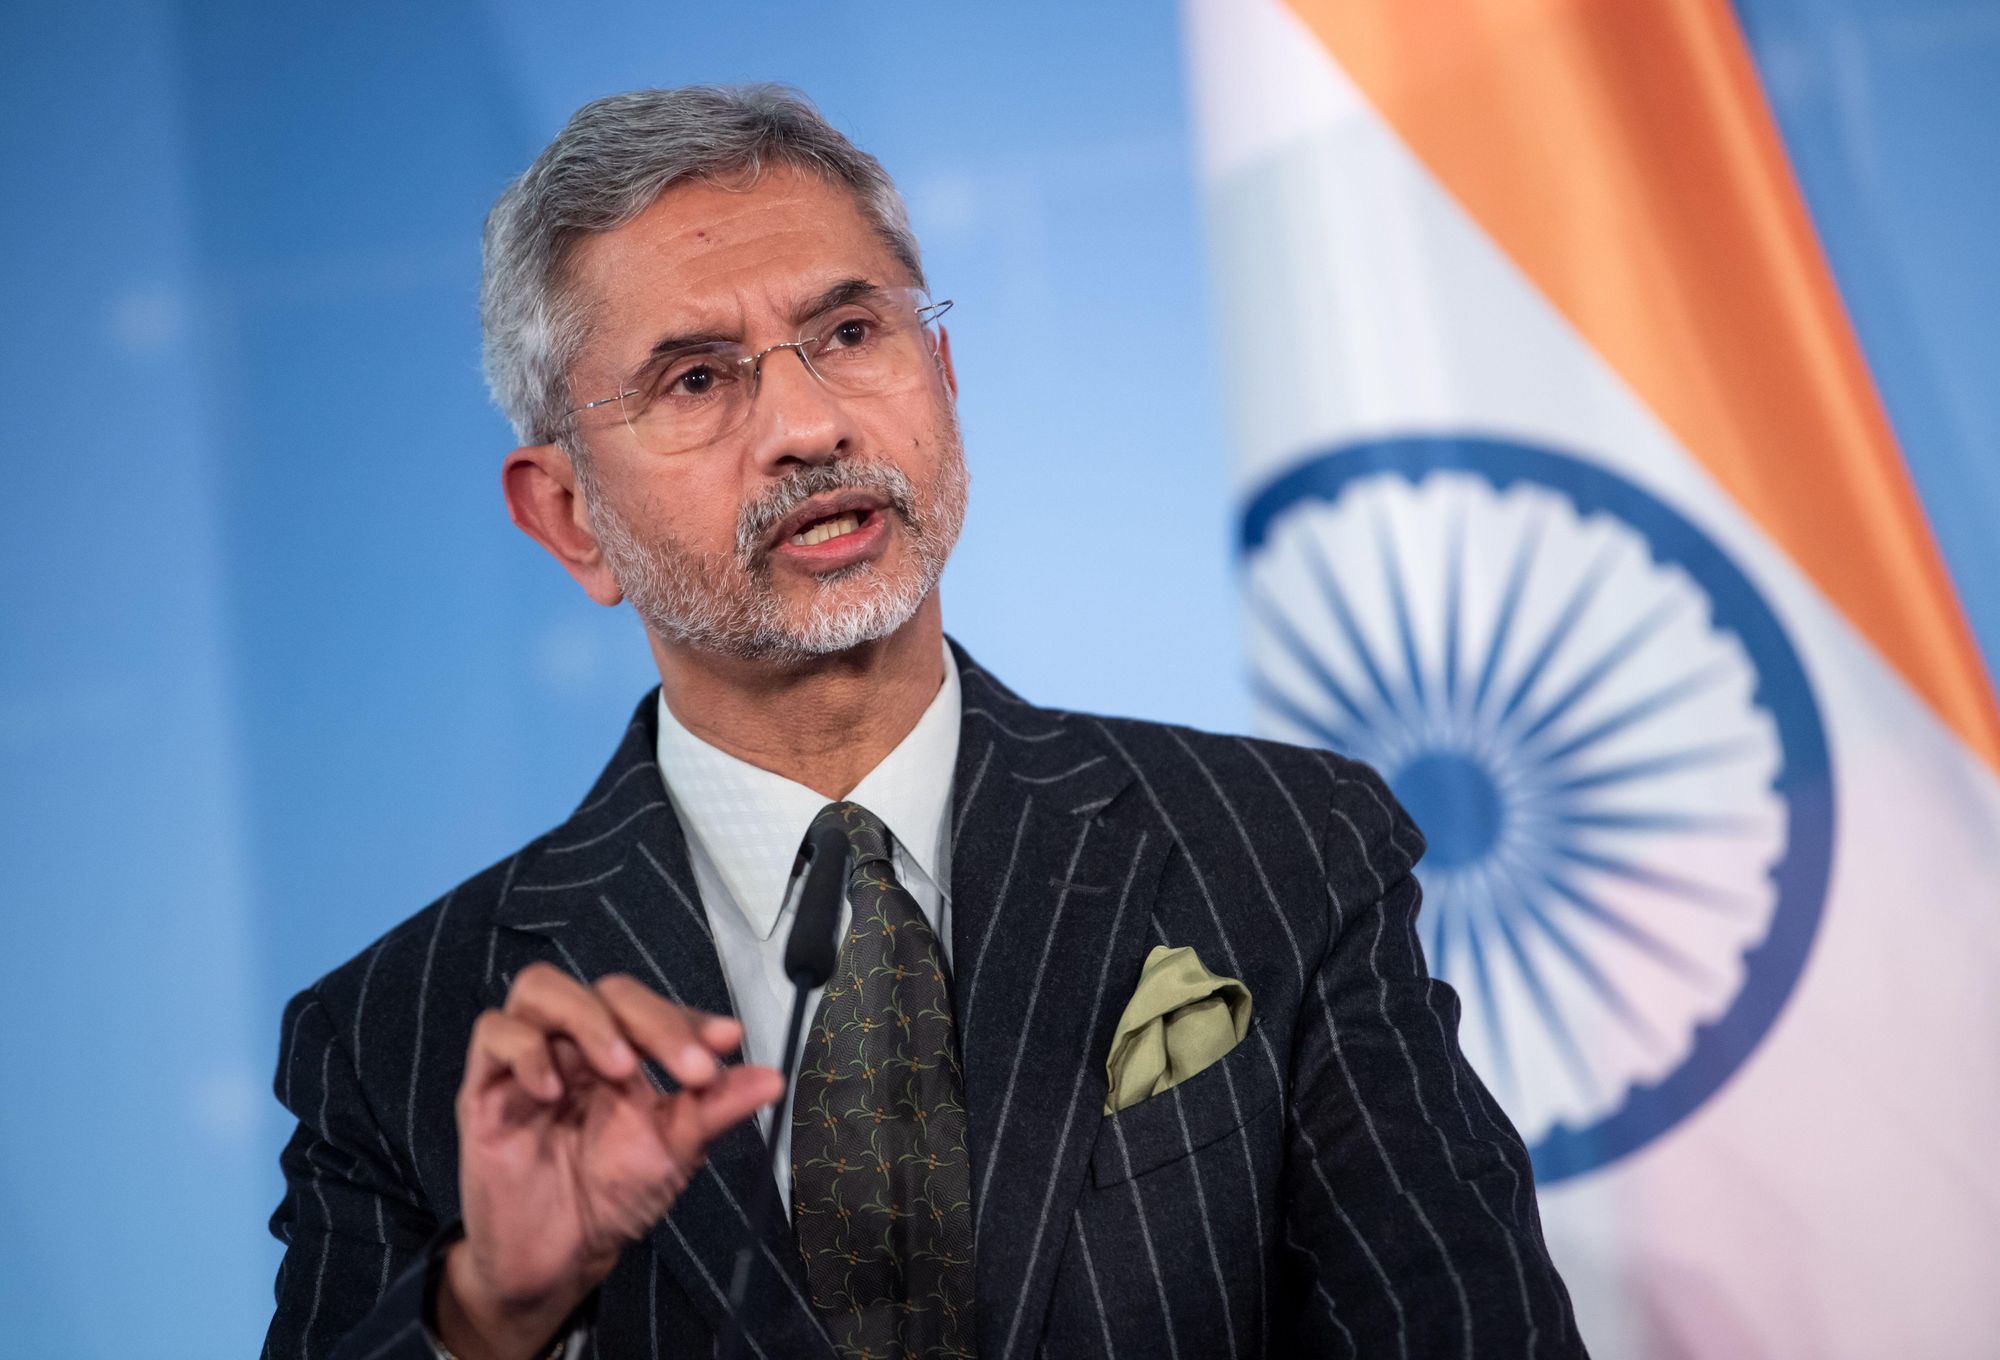 Jaishankar on Indian students facing deportation from Canada: “Unfair to punish student…culpable parties should be acted against”